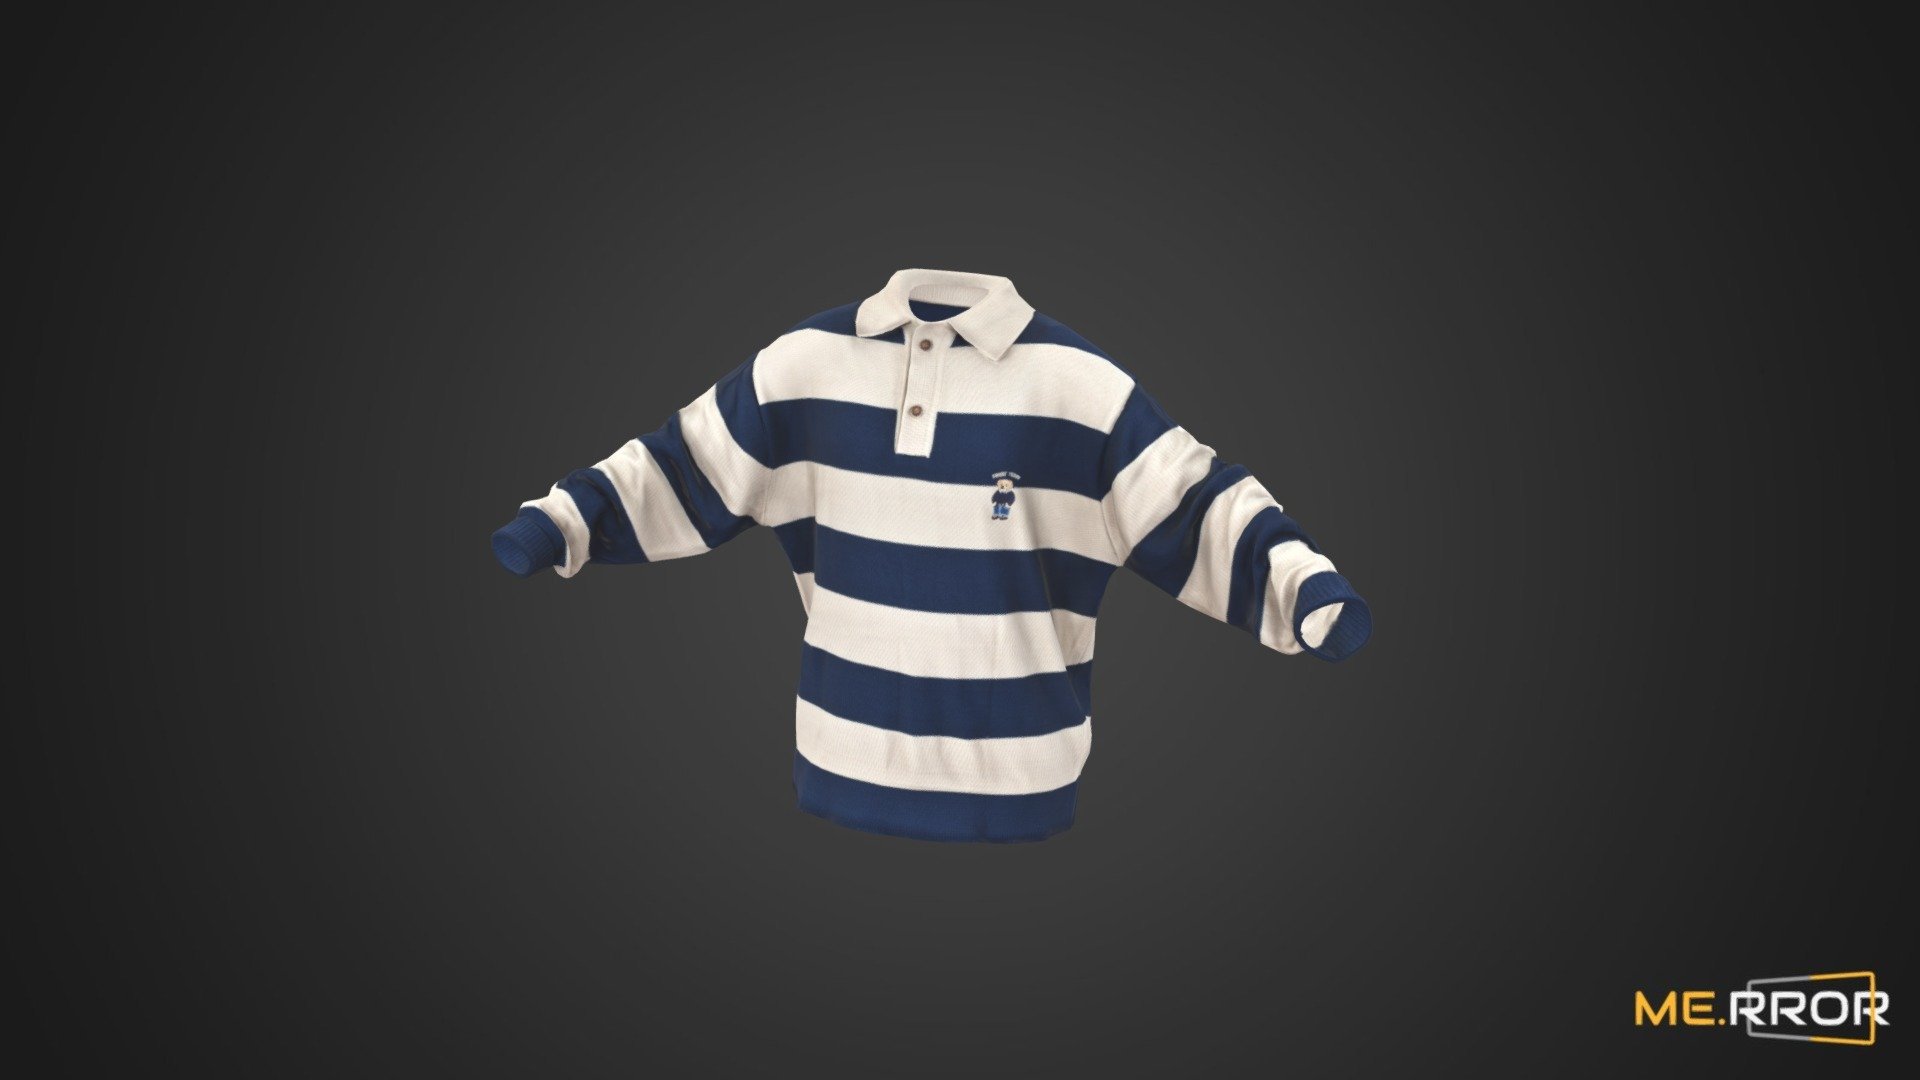 MERROR is a 3D Content PLATFORM which introduces various Asian assets to the 3D world


3DScanning #Photogrametry #ME.RROR - [Game-Ready] Stripes Knit - Buy Royalty Free 3D model by ME.RROR (@merror) 3d model